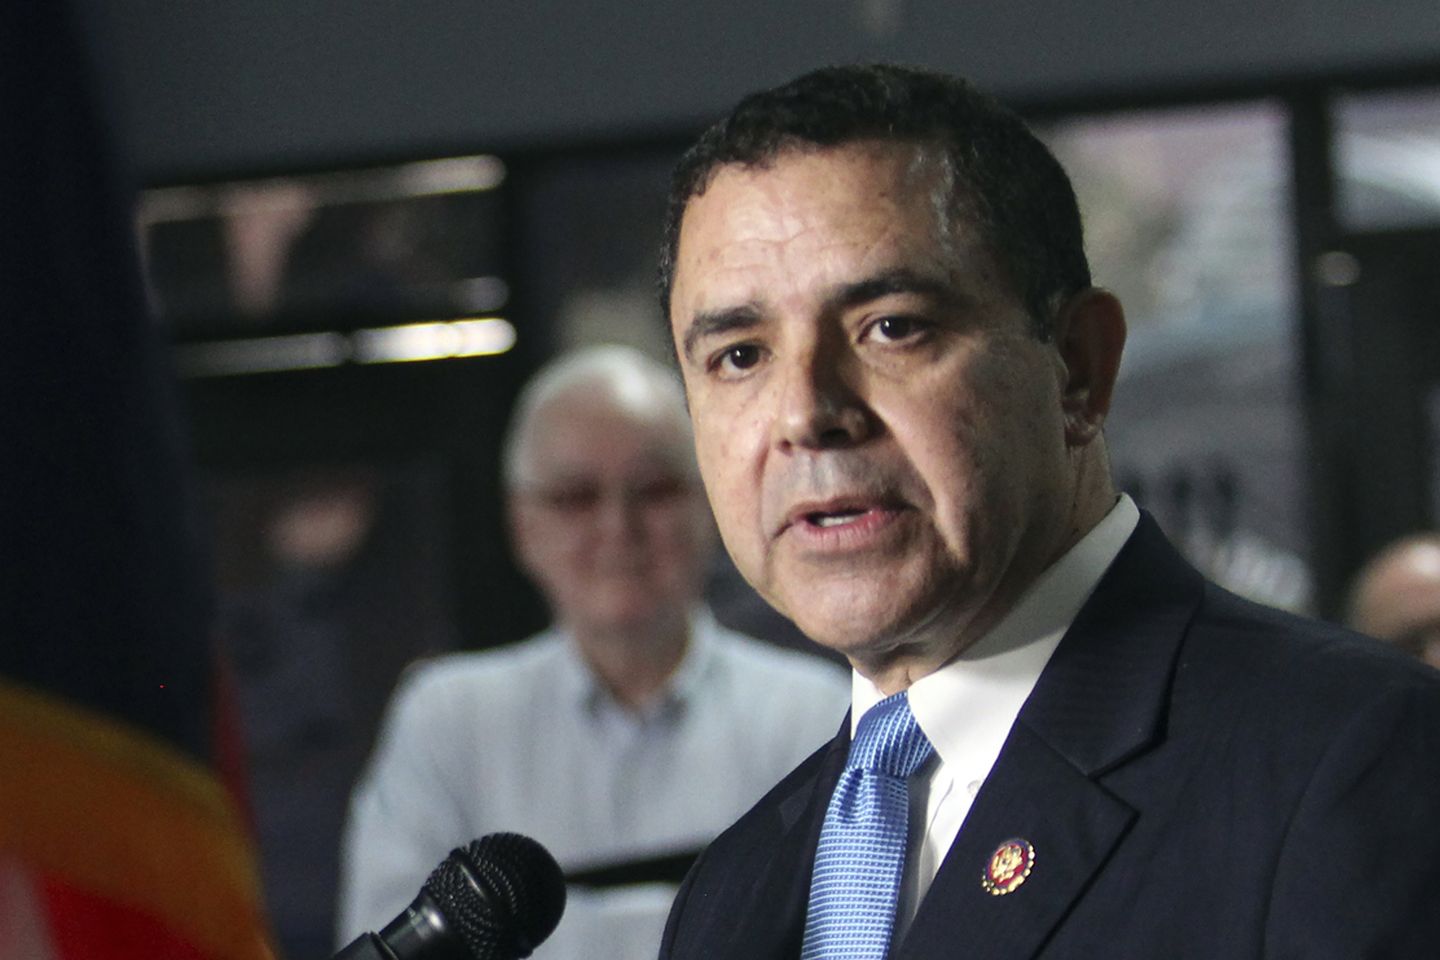 Rep. Cuellar says Biden needs to show repercussions for illegal border crossings with deportations